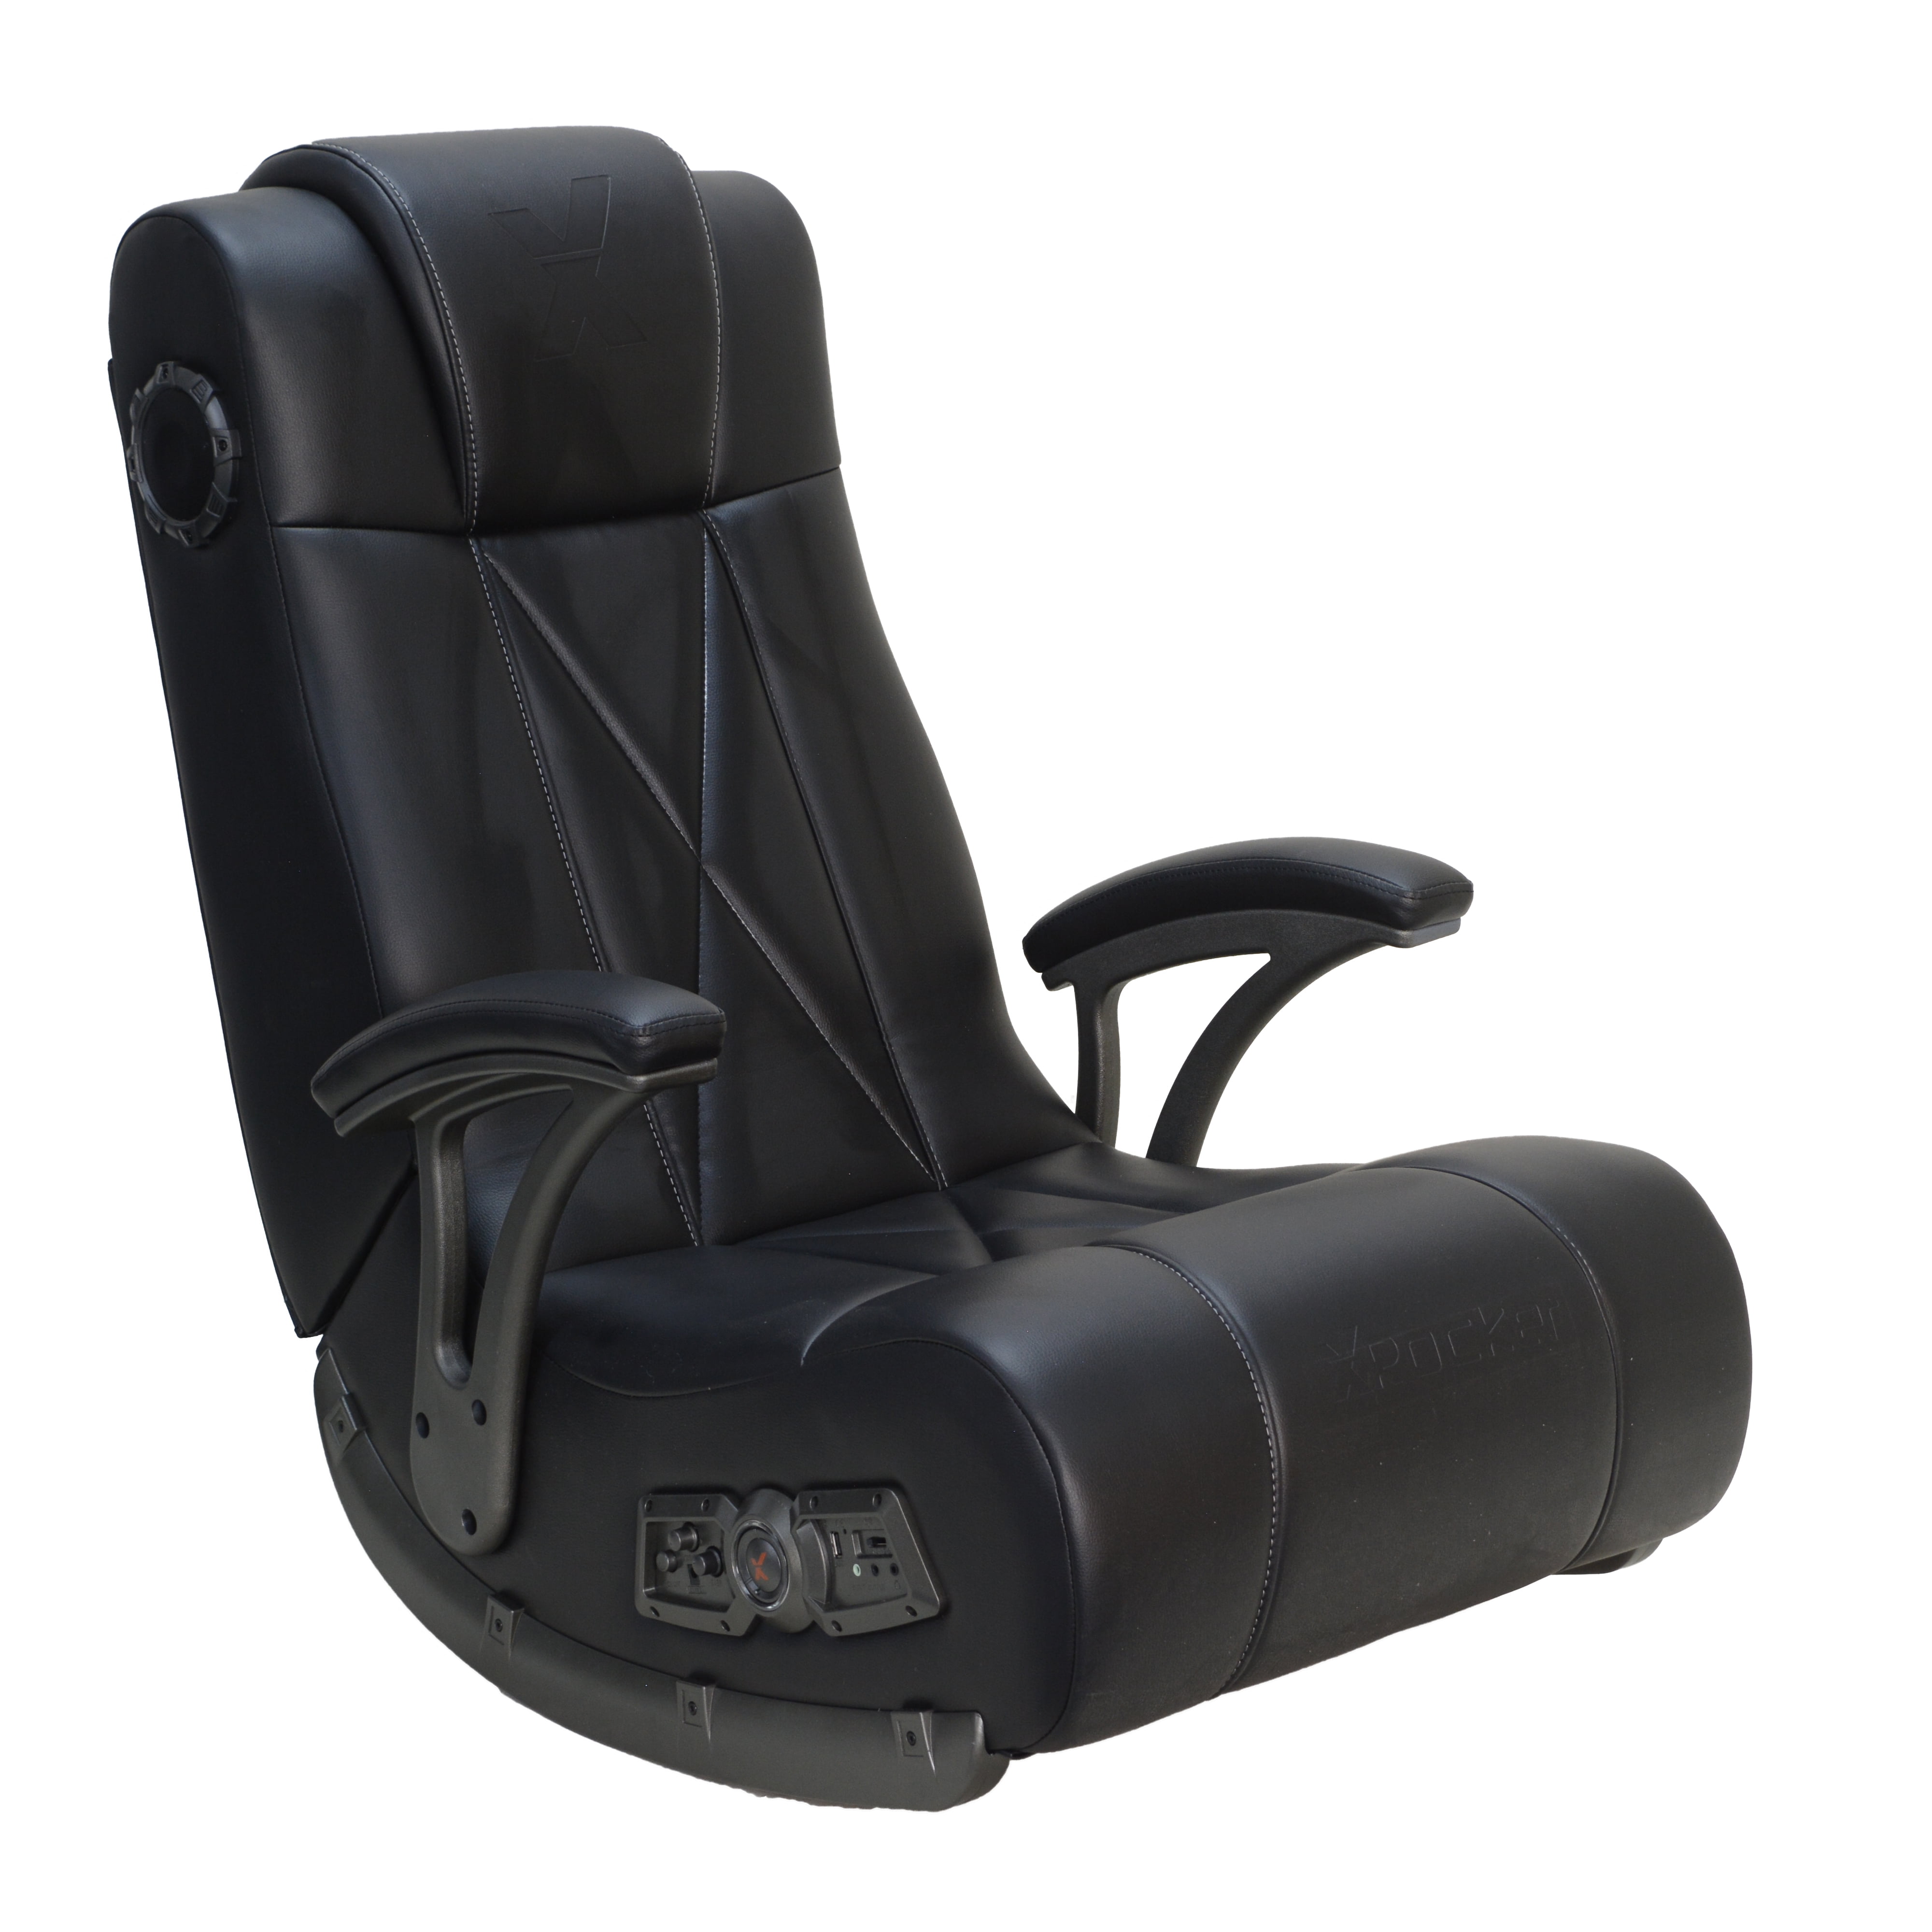  X Rocker SE II Leather Lounging Video Gaming Floor Chair, with  Wireless Audio Transmission, 2 Speakers, Subwoofer, Armrest, Foldable,  5143601, 22.64 x 33 x 35,  Exclusive, Black : Home & Kitchen